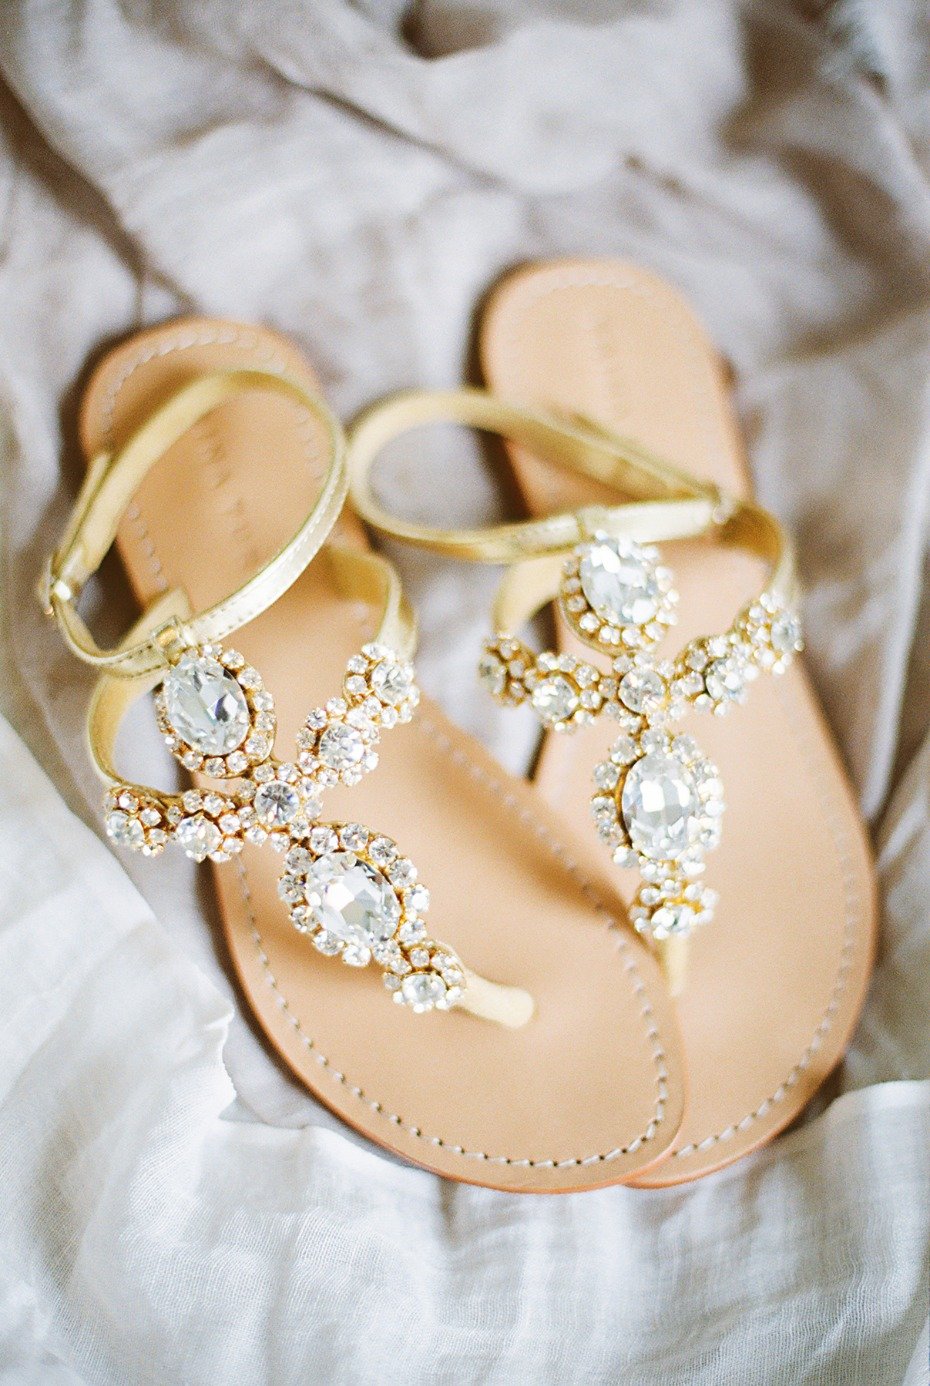 Sparkly sandals for the bride